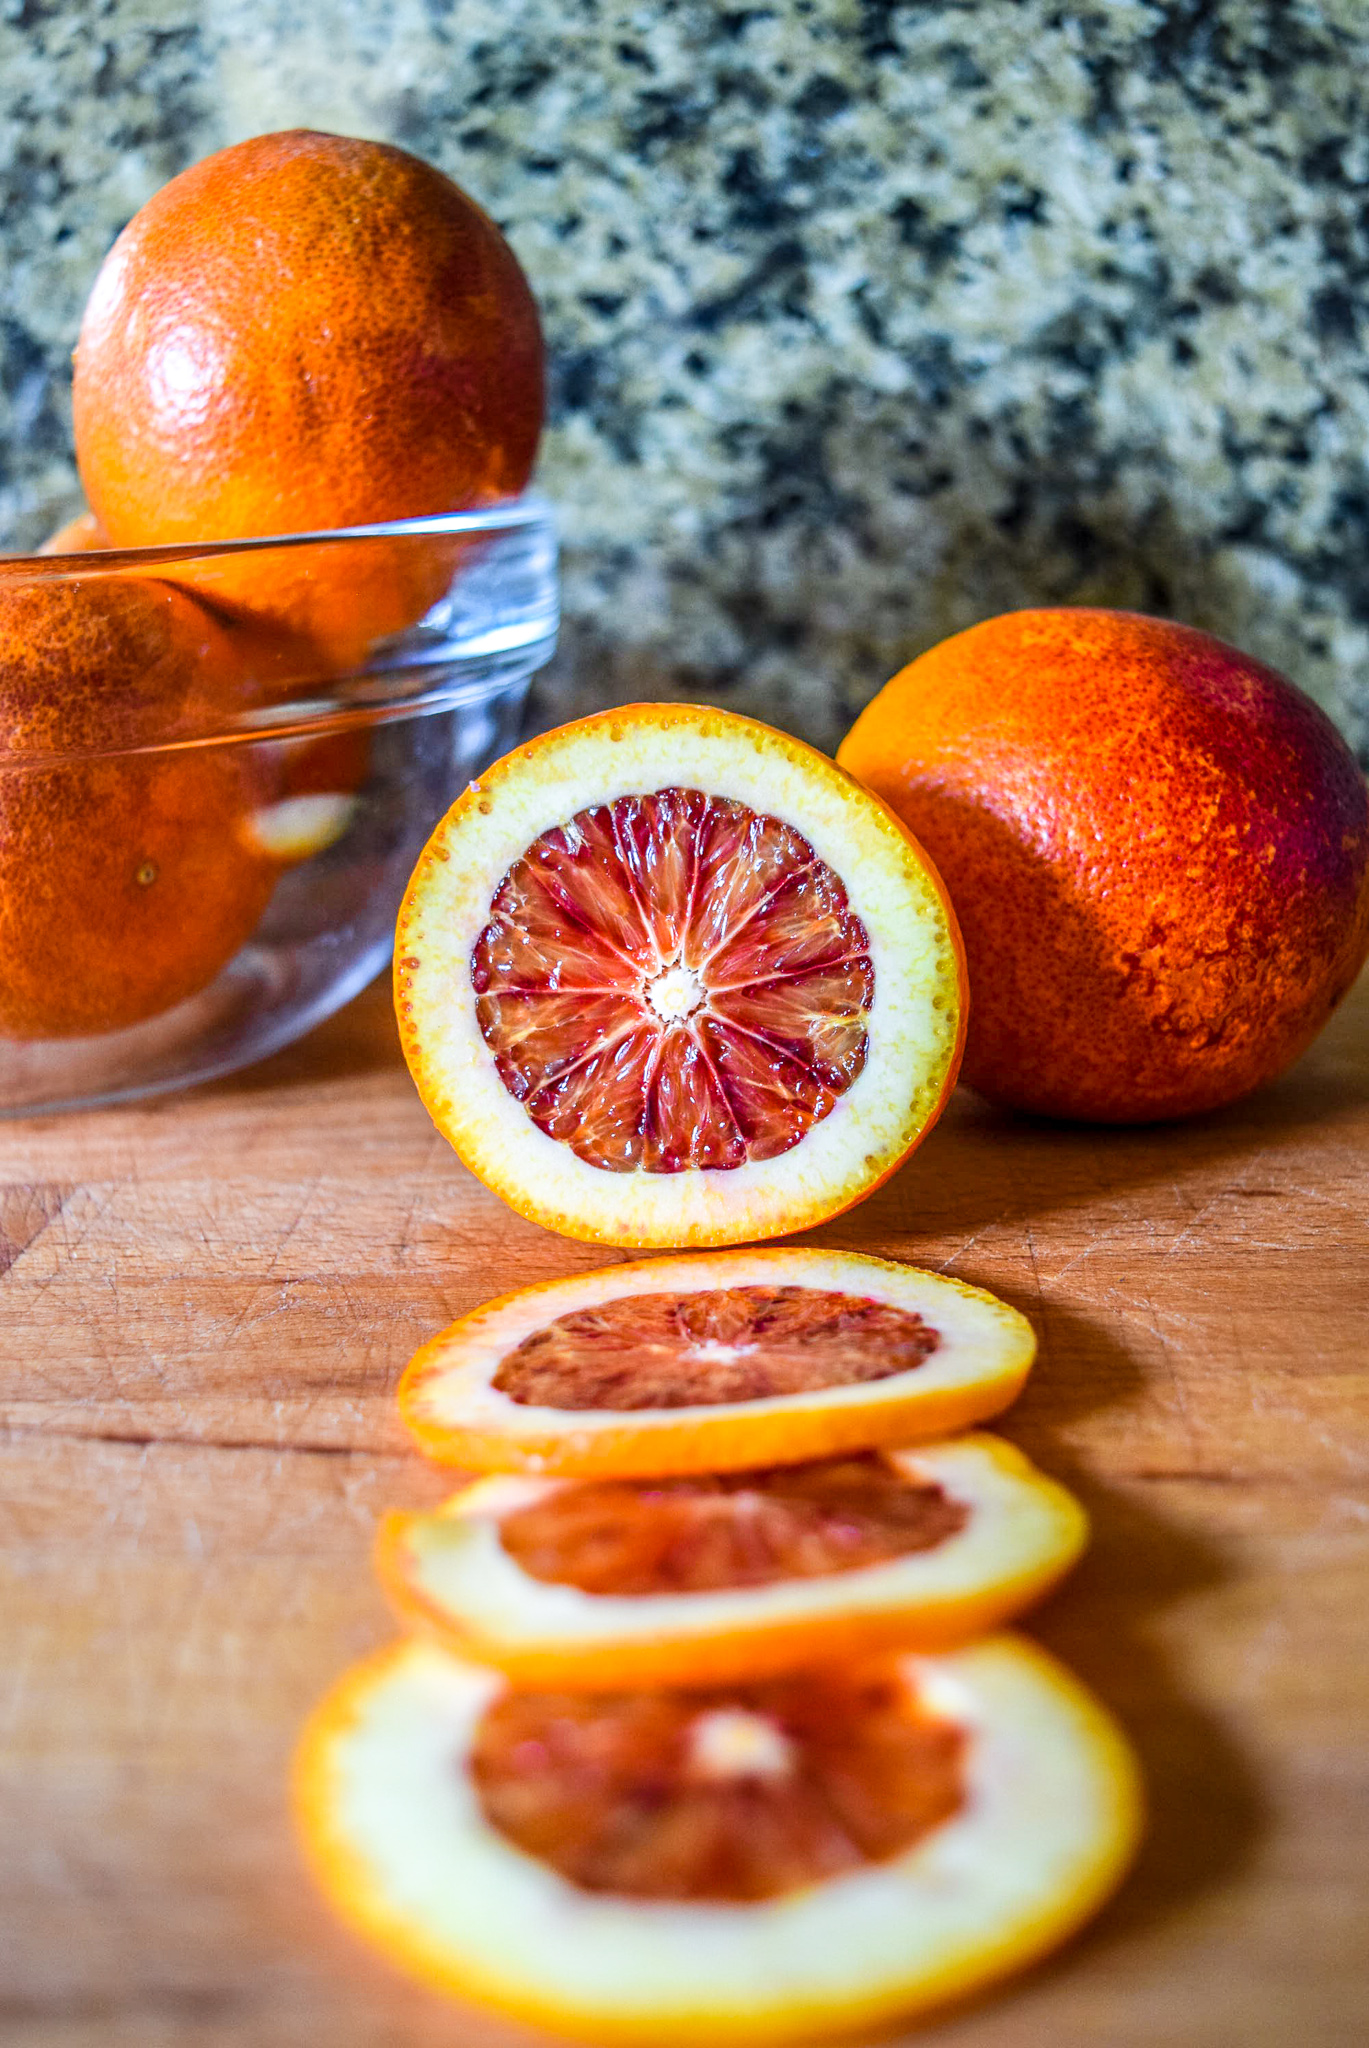 Sliced blood orange rounds in preparation for candying from front